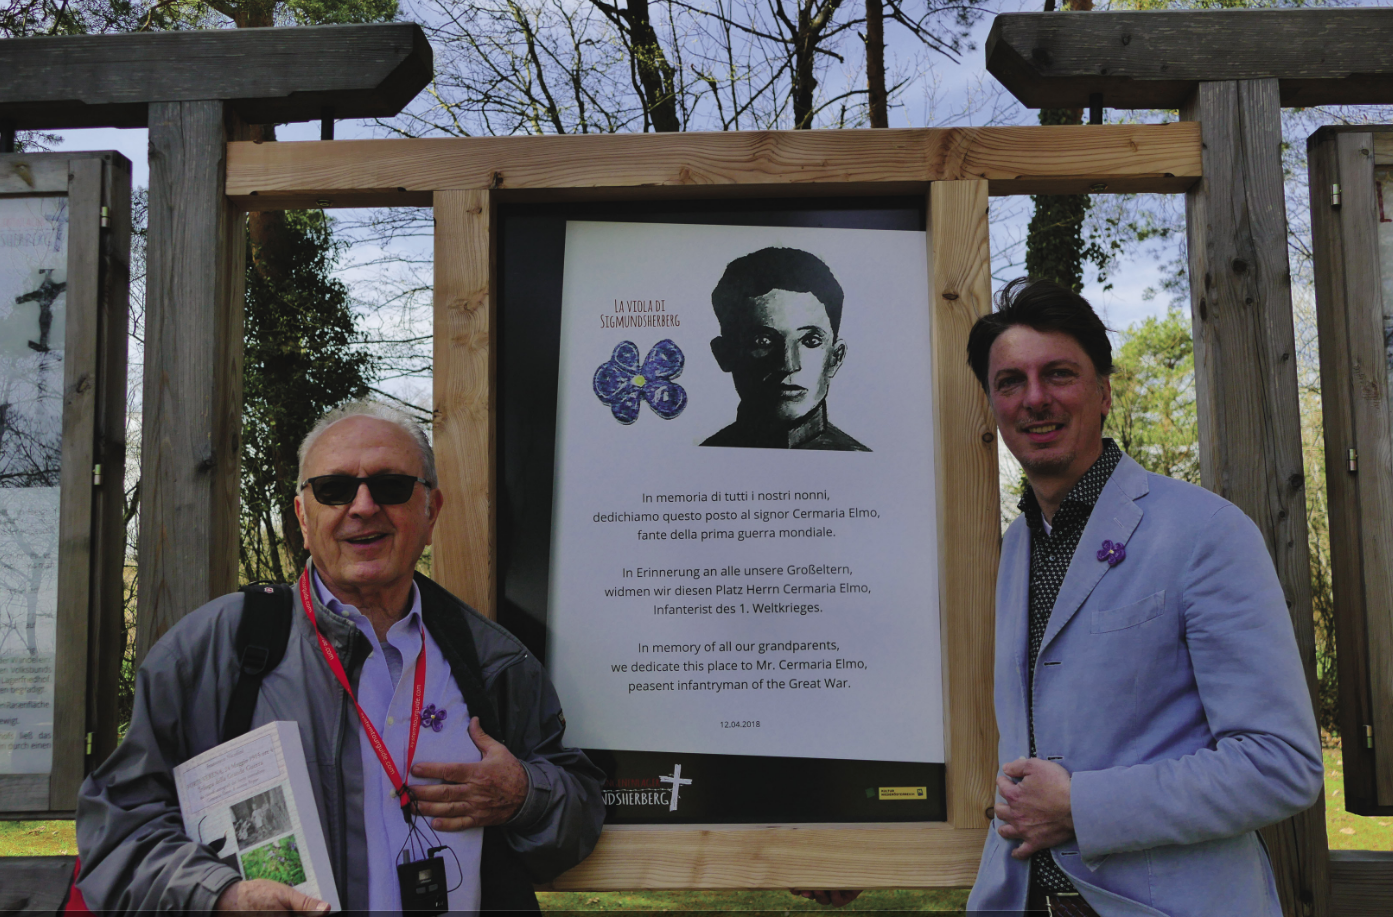 Sigmundsherberg, April 12, 2018 From left: Francesco Nicolini and the Mayor of Sigmundsherberg, Franz Goed, during the dedication of the war cemetery to Cermaria Elmo, grandfather Peppe